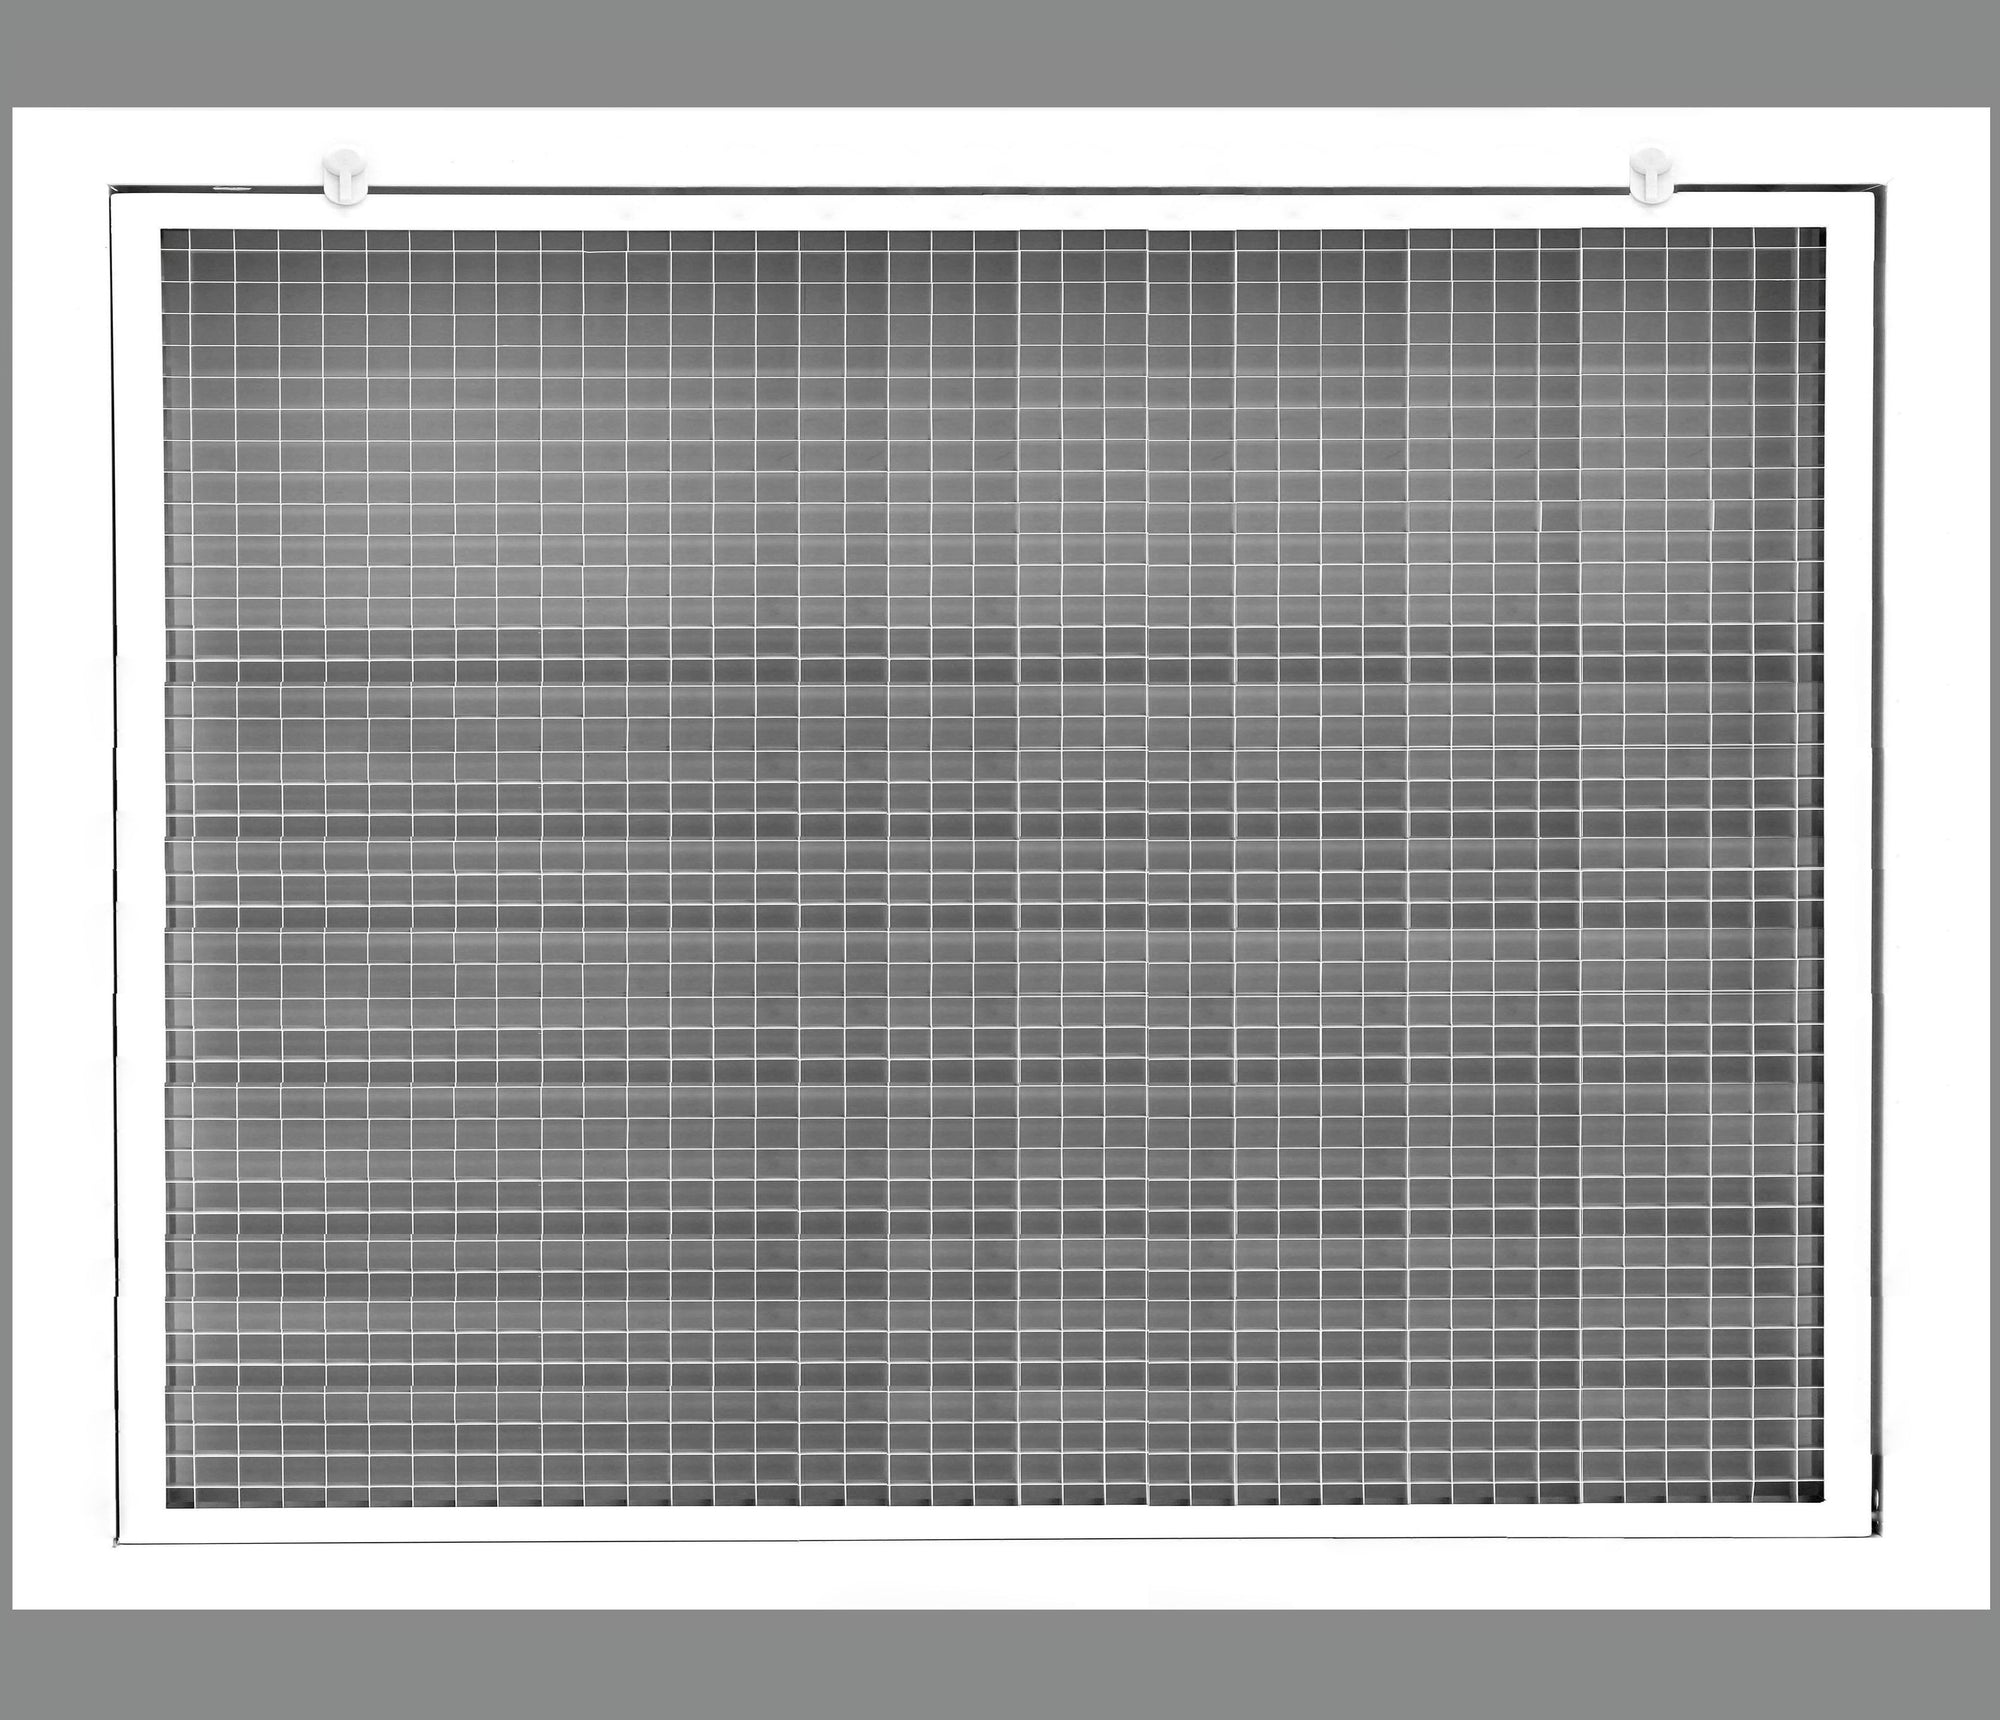 26" x 18" Cube Core Eggcrate Return Air Filter Grille for 1" Filter